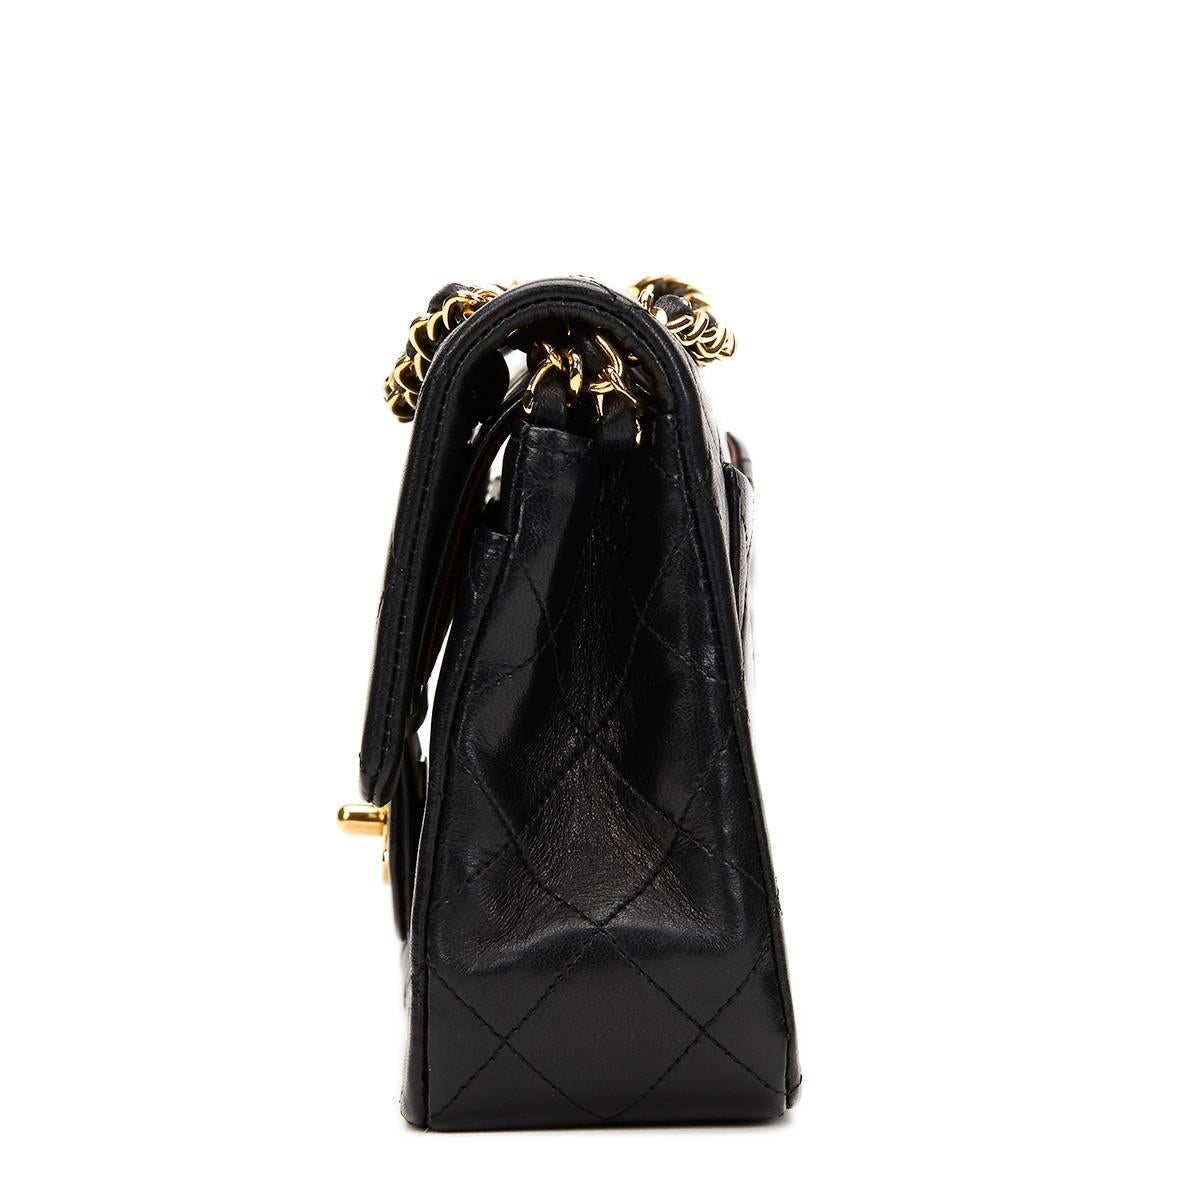 CHANEL
Black Quilted Lambskin Vintage Small Classic Double Flap Bag

This CHANEL Small Classic Double Flap Bag is in Excellent Pre-Owned Condition. Circa 1990. Primarily made from Lambskin Leather complimented by Gold hardware. Our  reference is